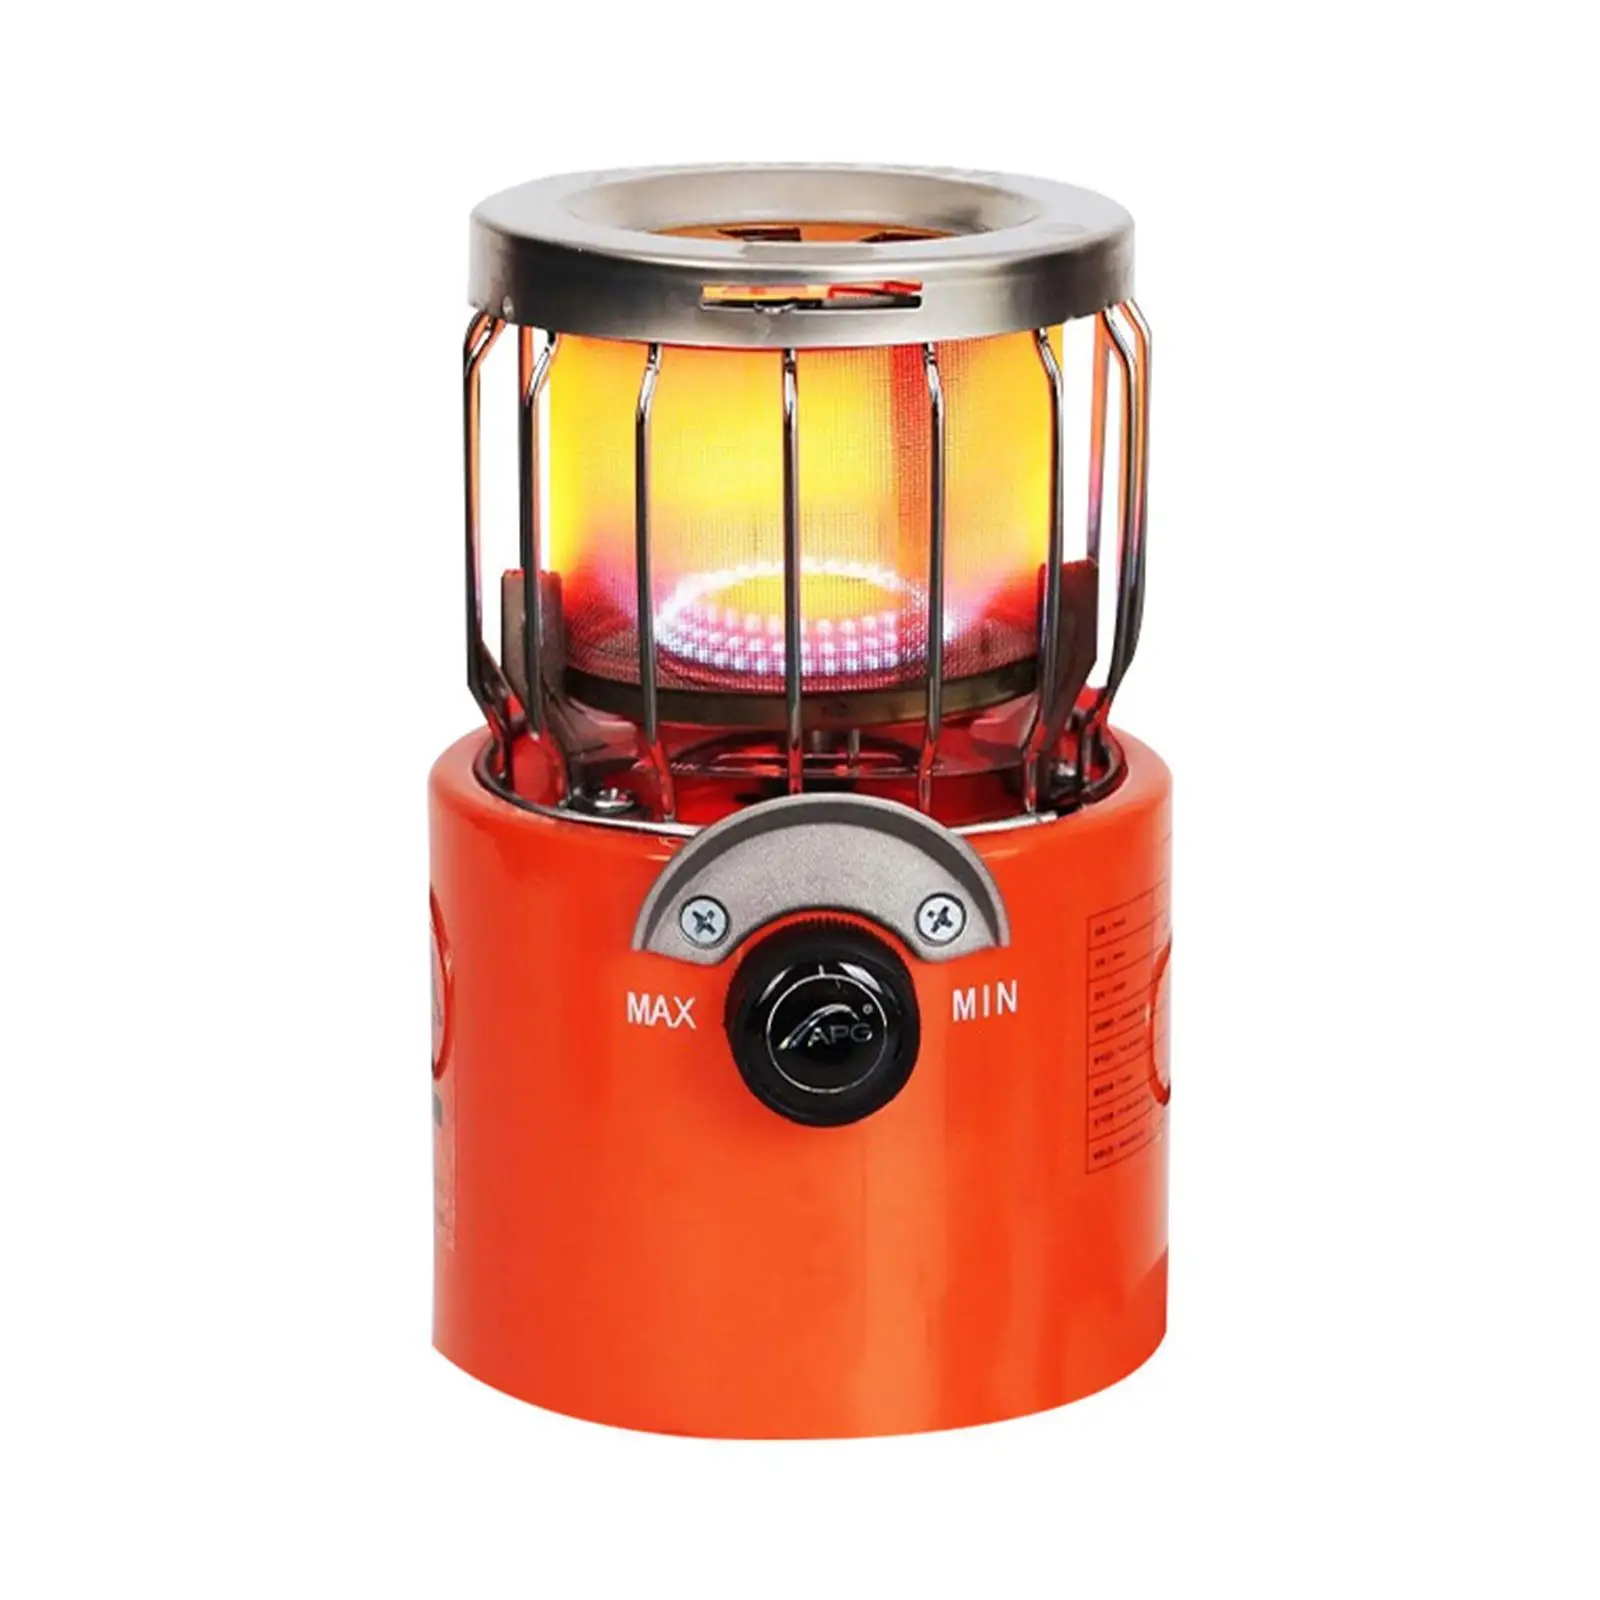 

2000w Portable Mini Gas Heater Camping Stove Heating Cooker For Cooking Backpacking Ice Fishing Camping Hiking K1p4